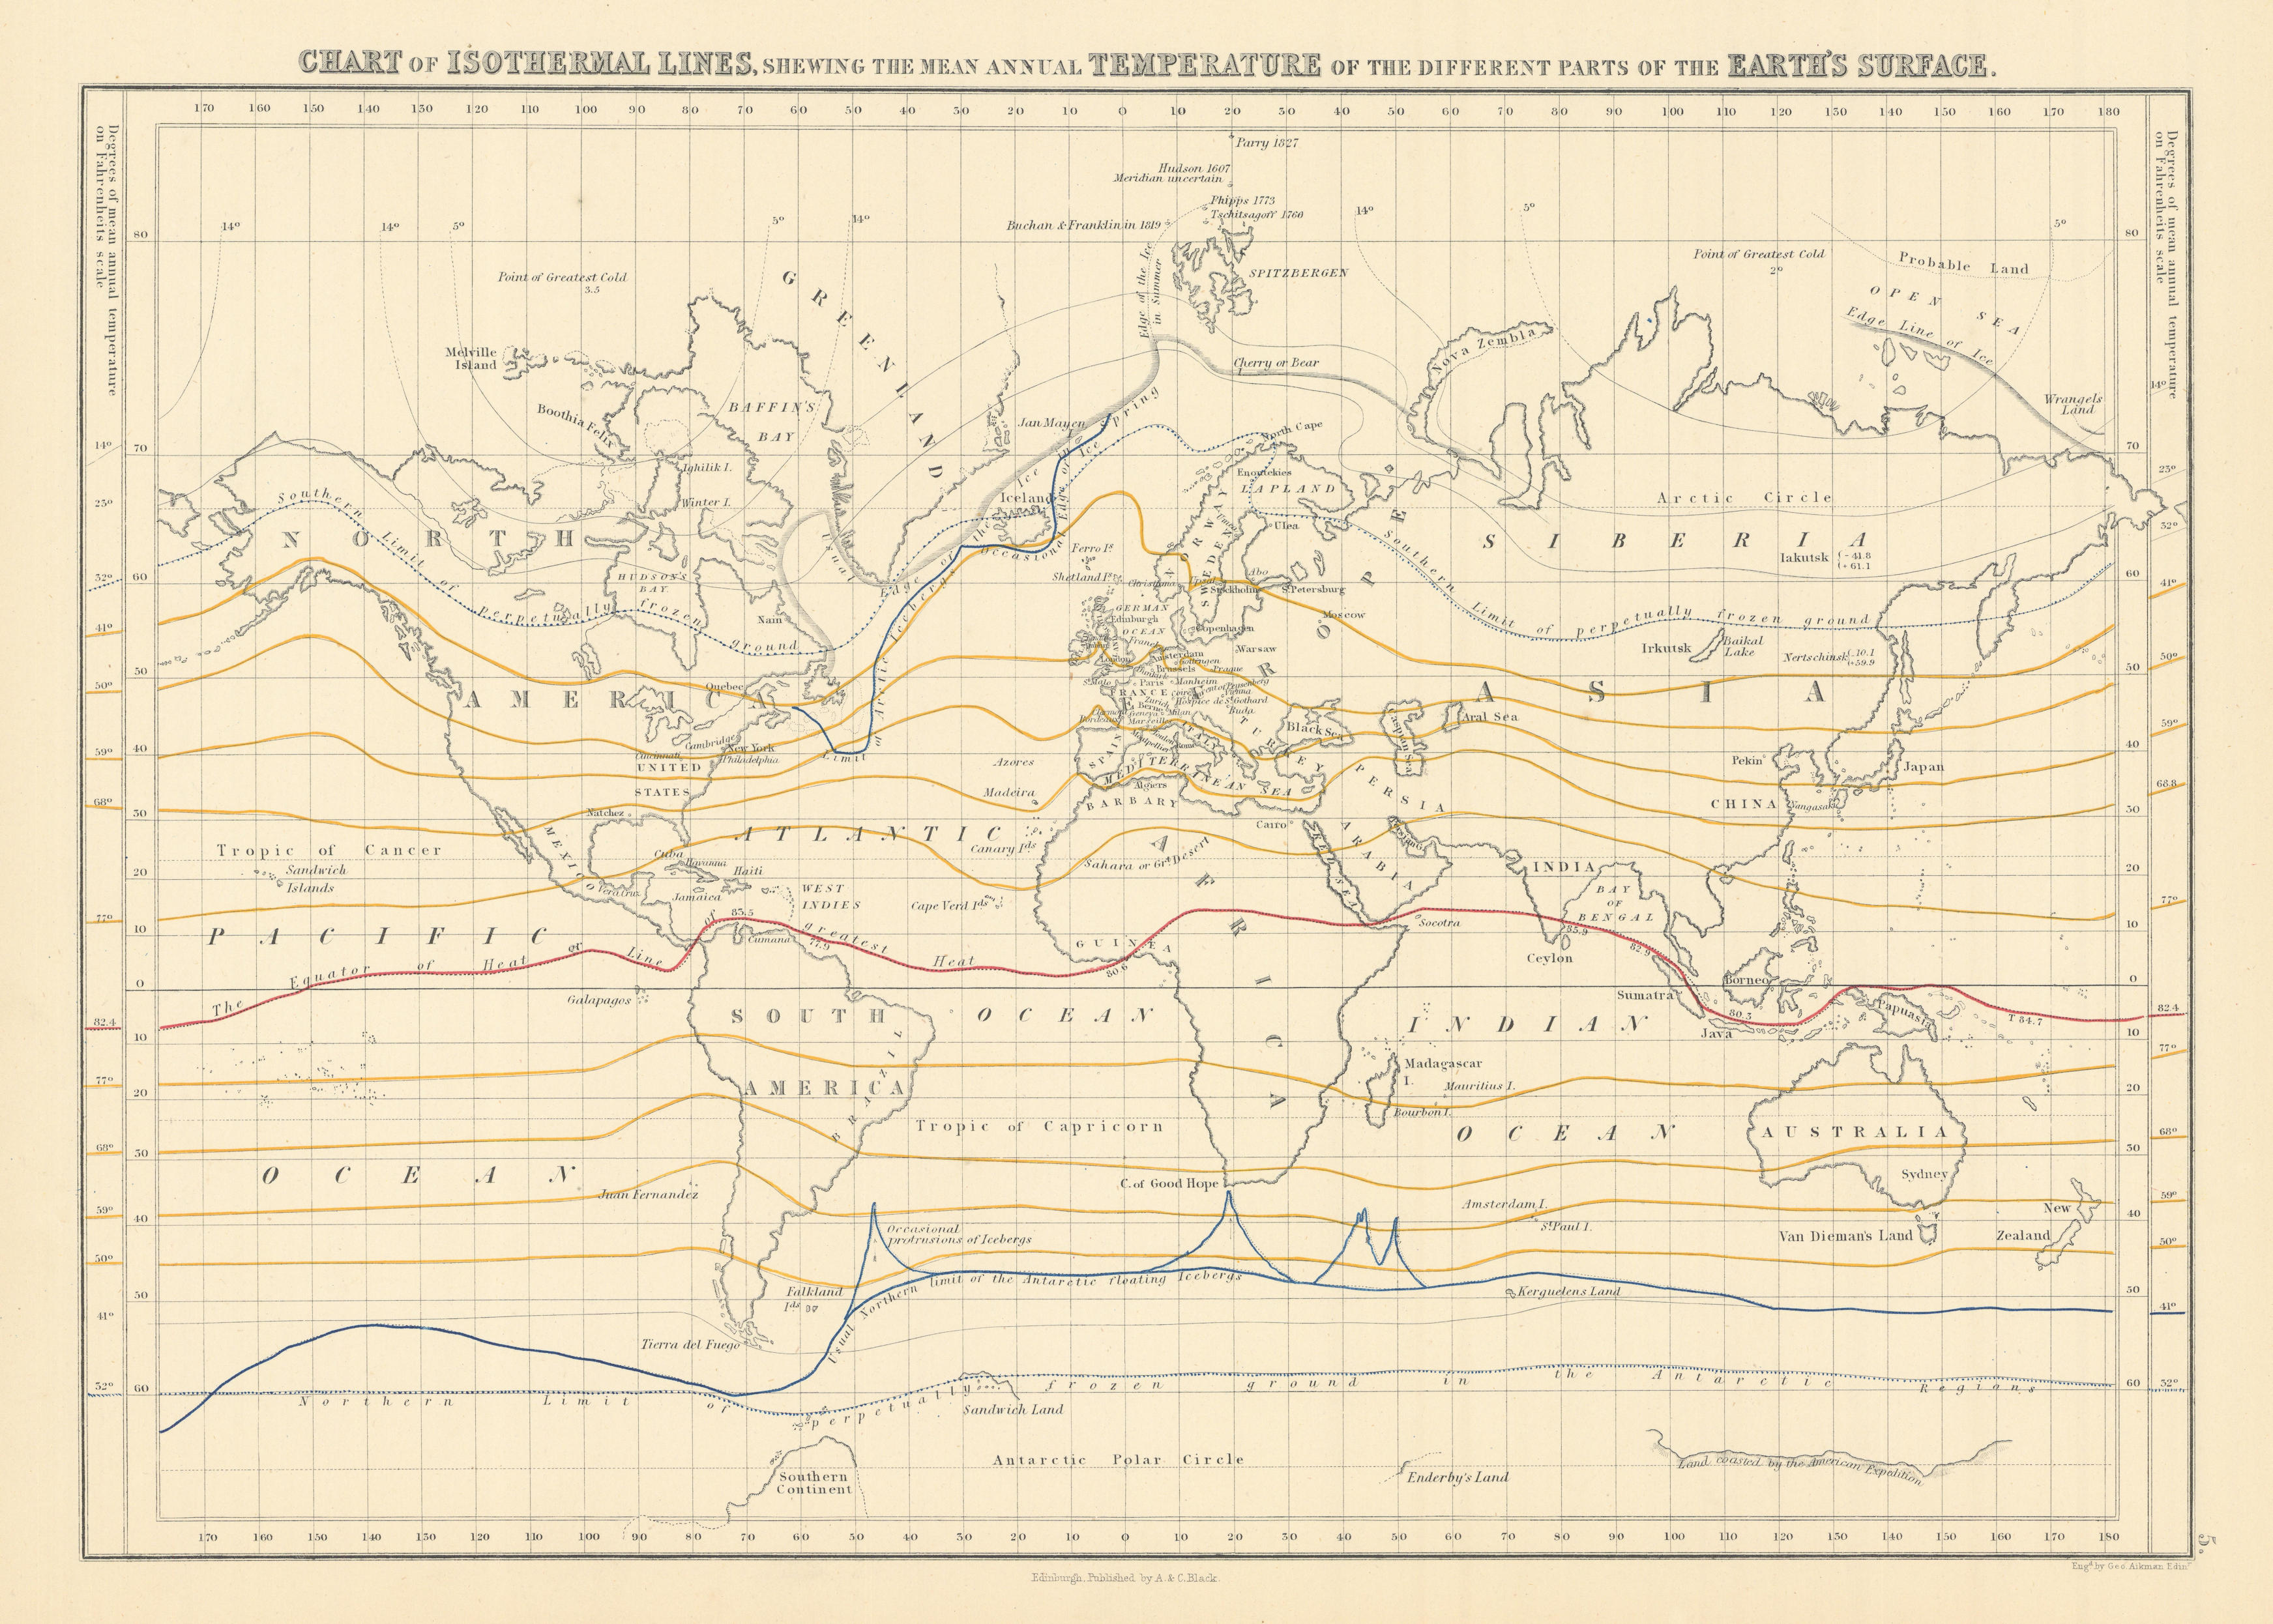 World chart of isothermal lines. Mean annual temperature. GEORGE AIKMAN 1862 map